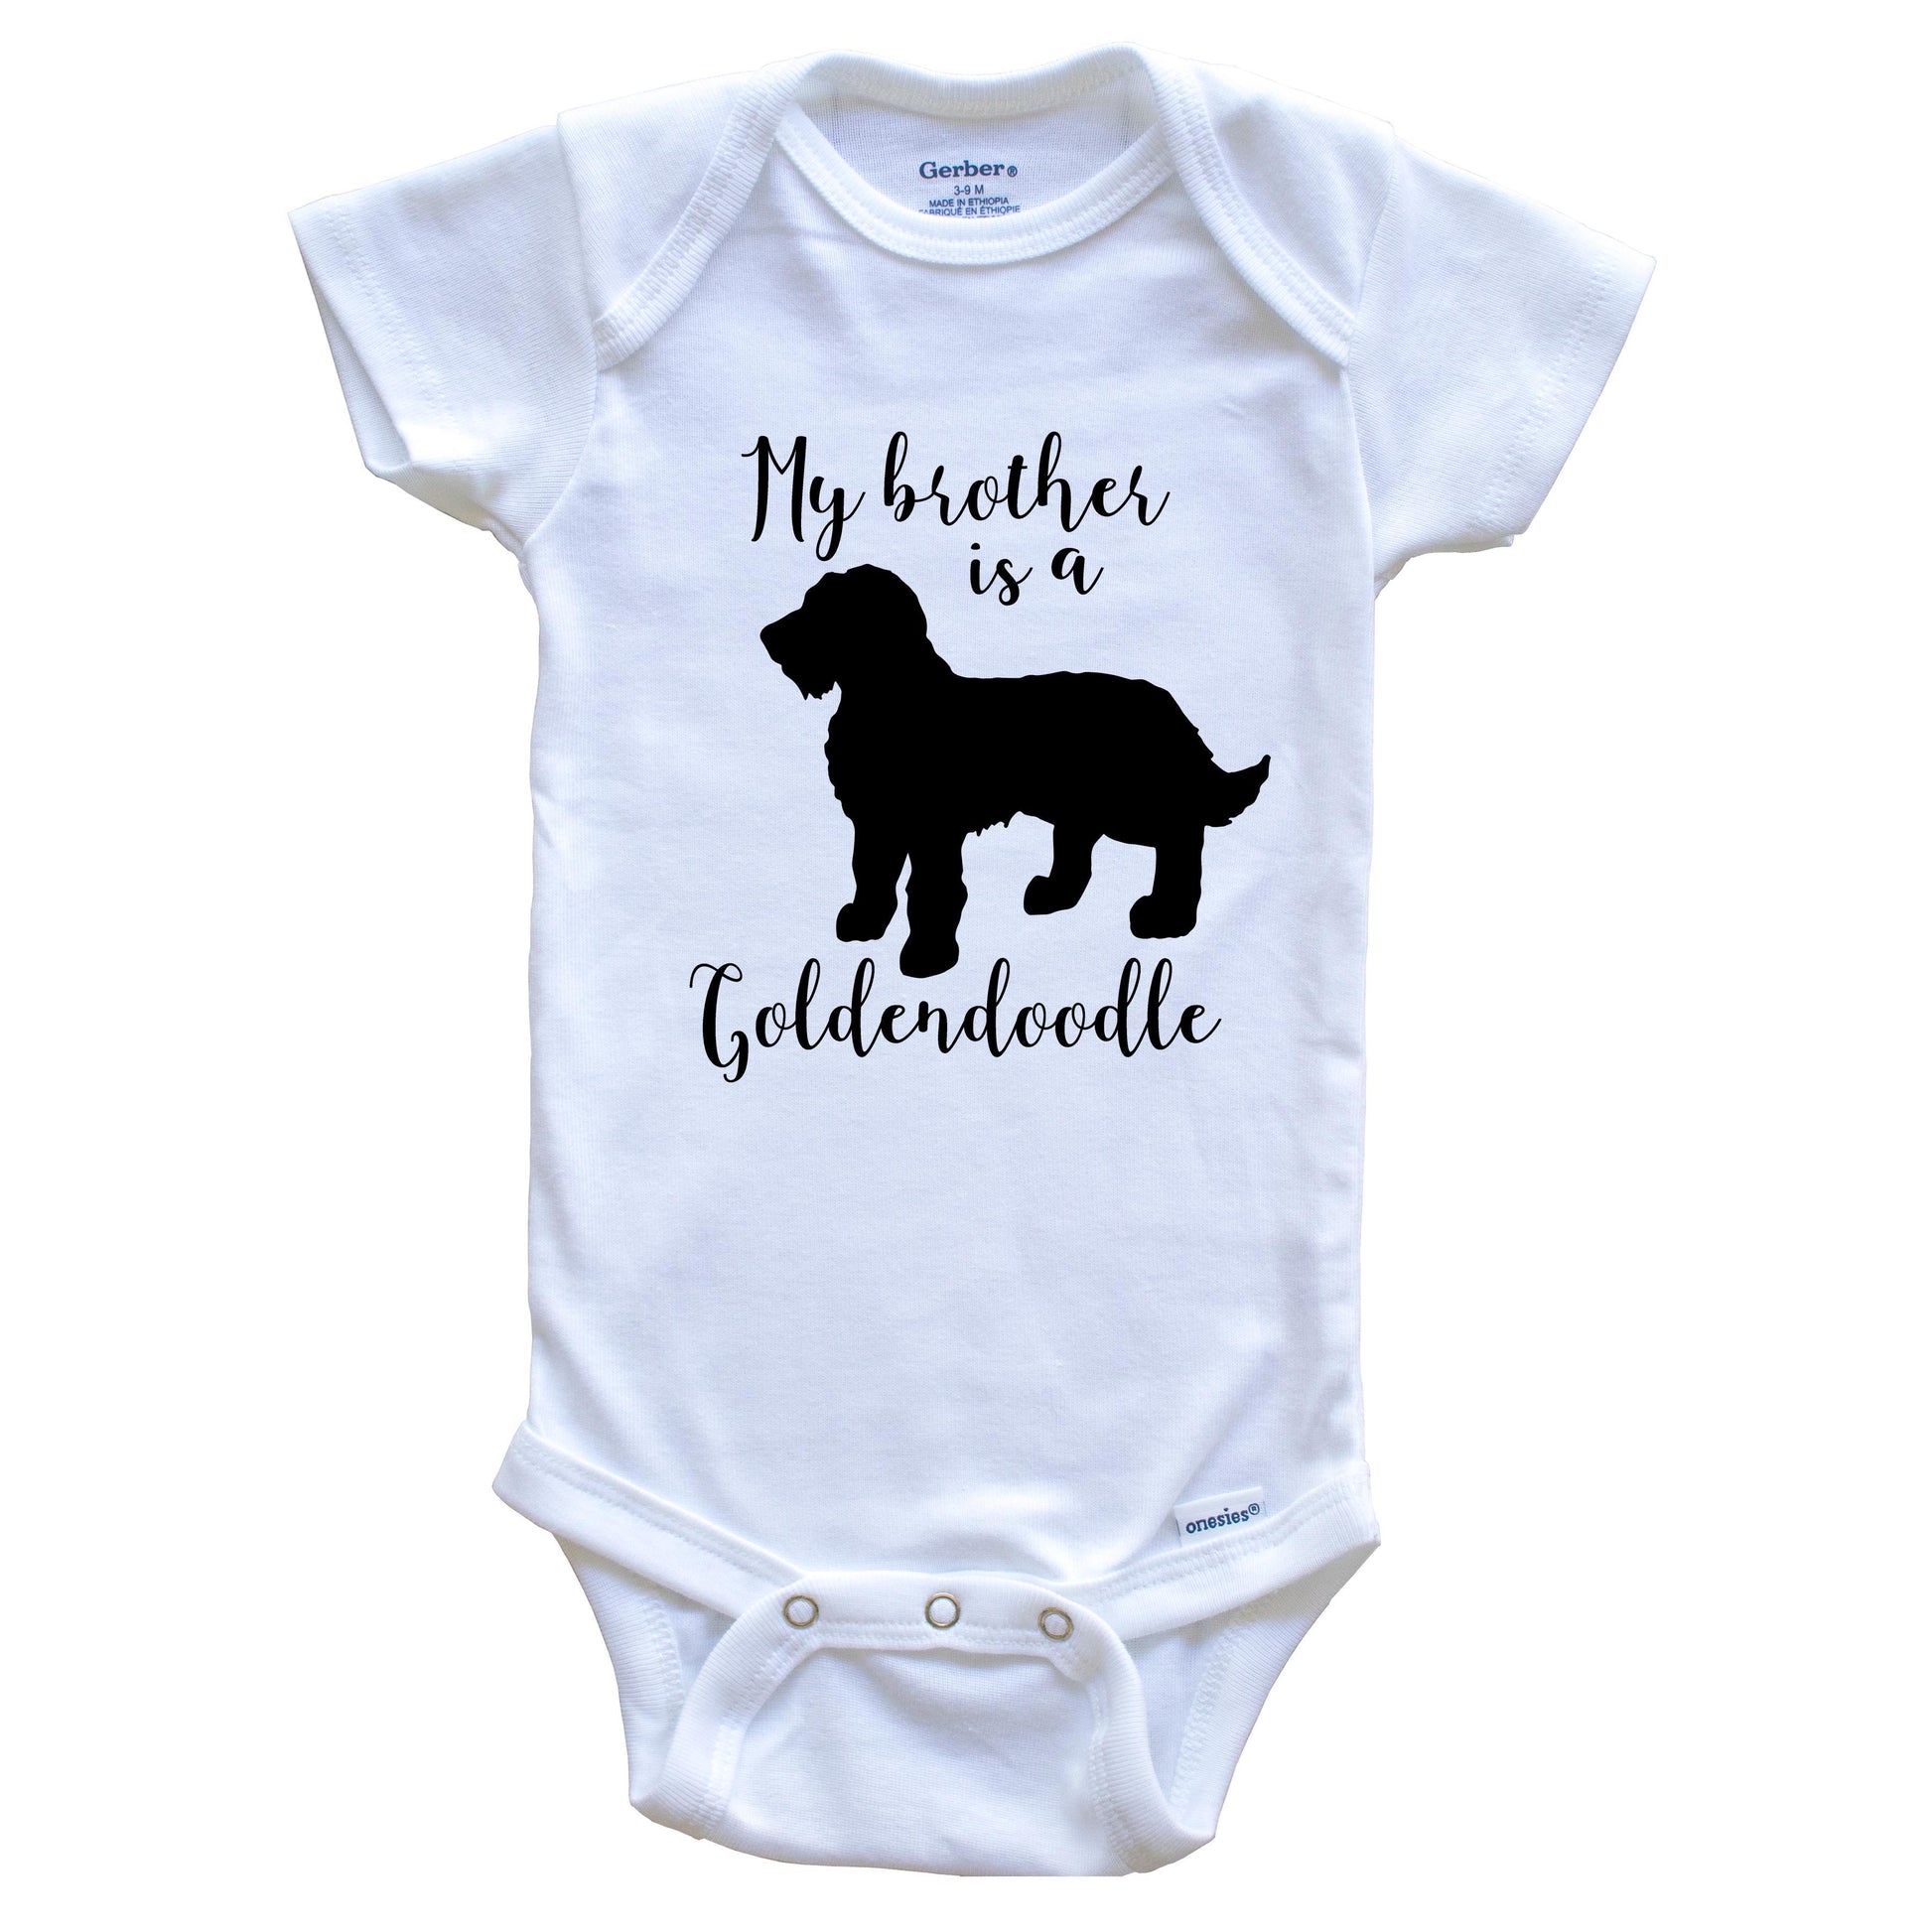 My Brother Is A Goldendoodle Cute Dog Baby Onesie - Goldendoodle One Piece Baby Bodysuit